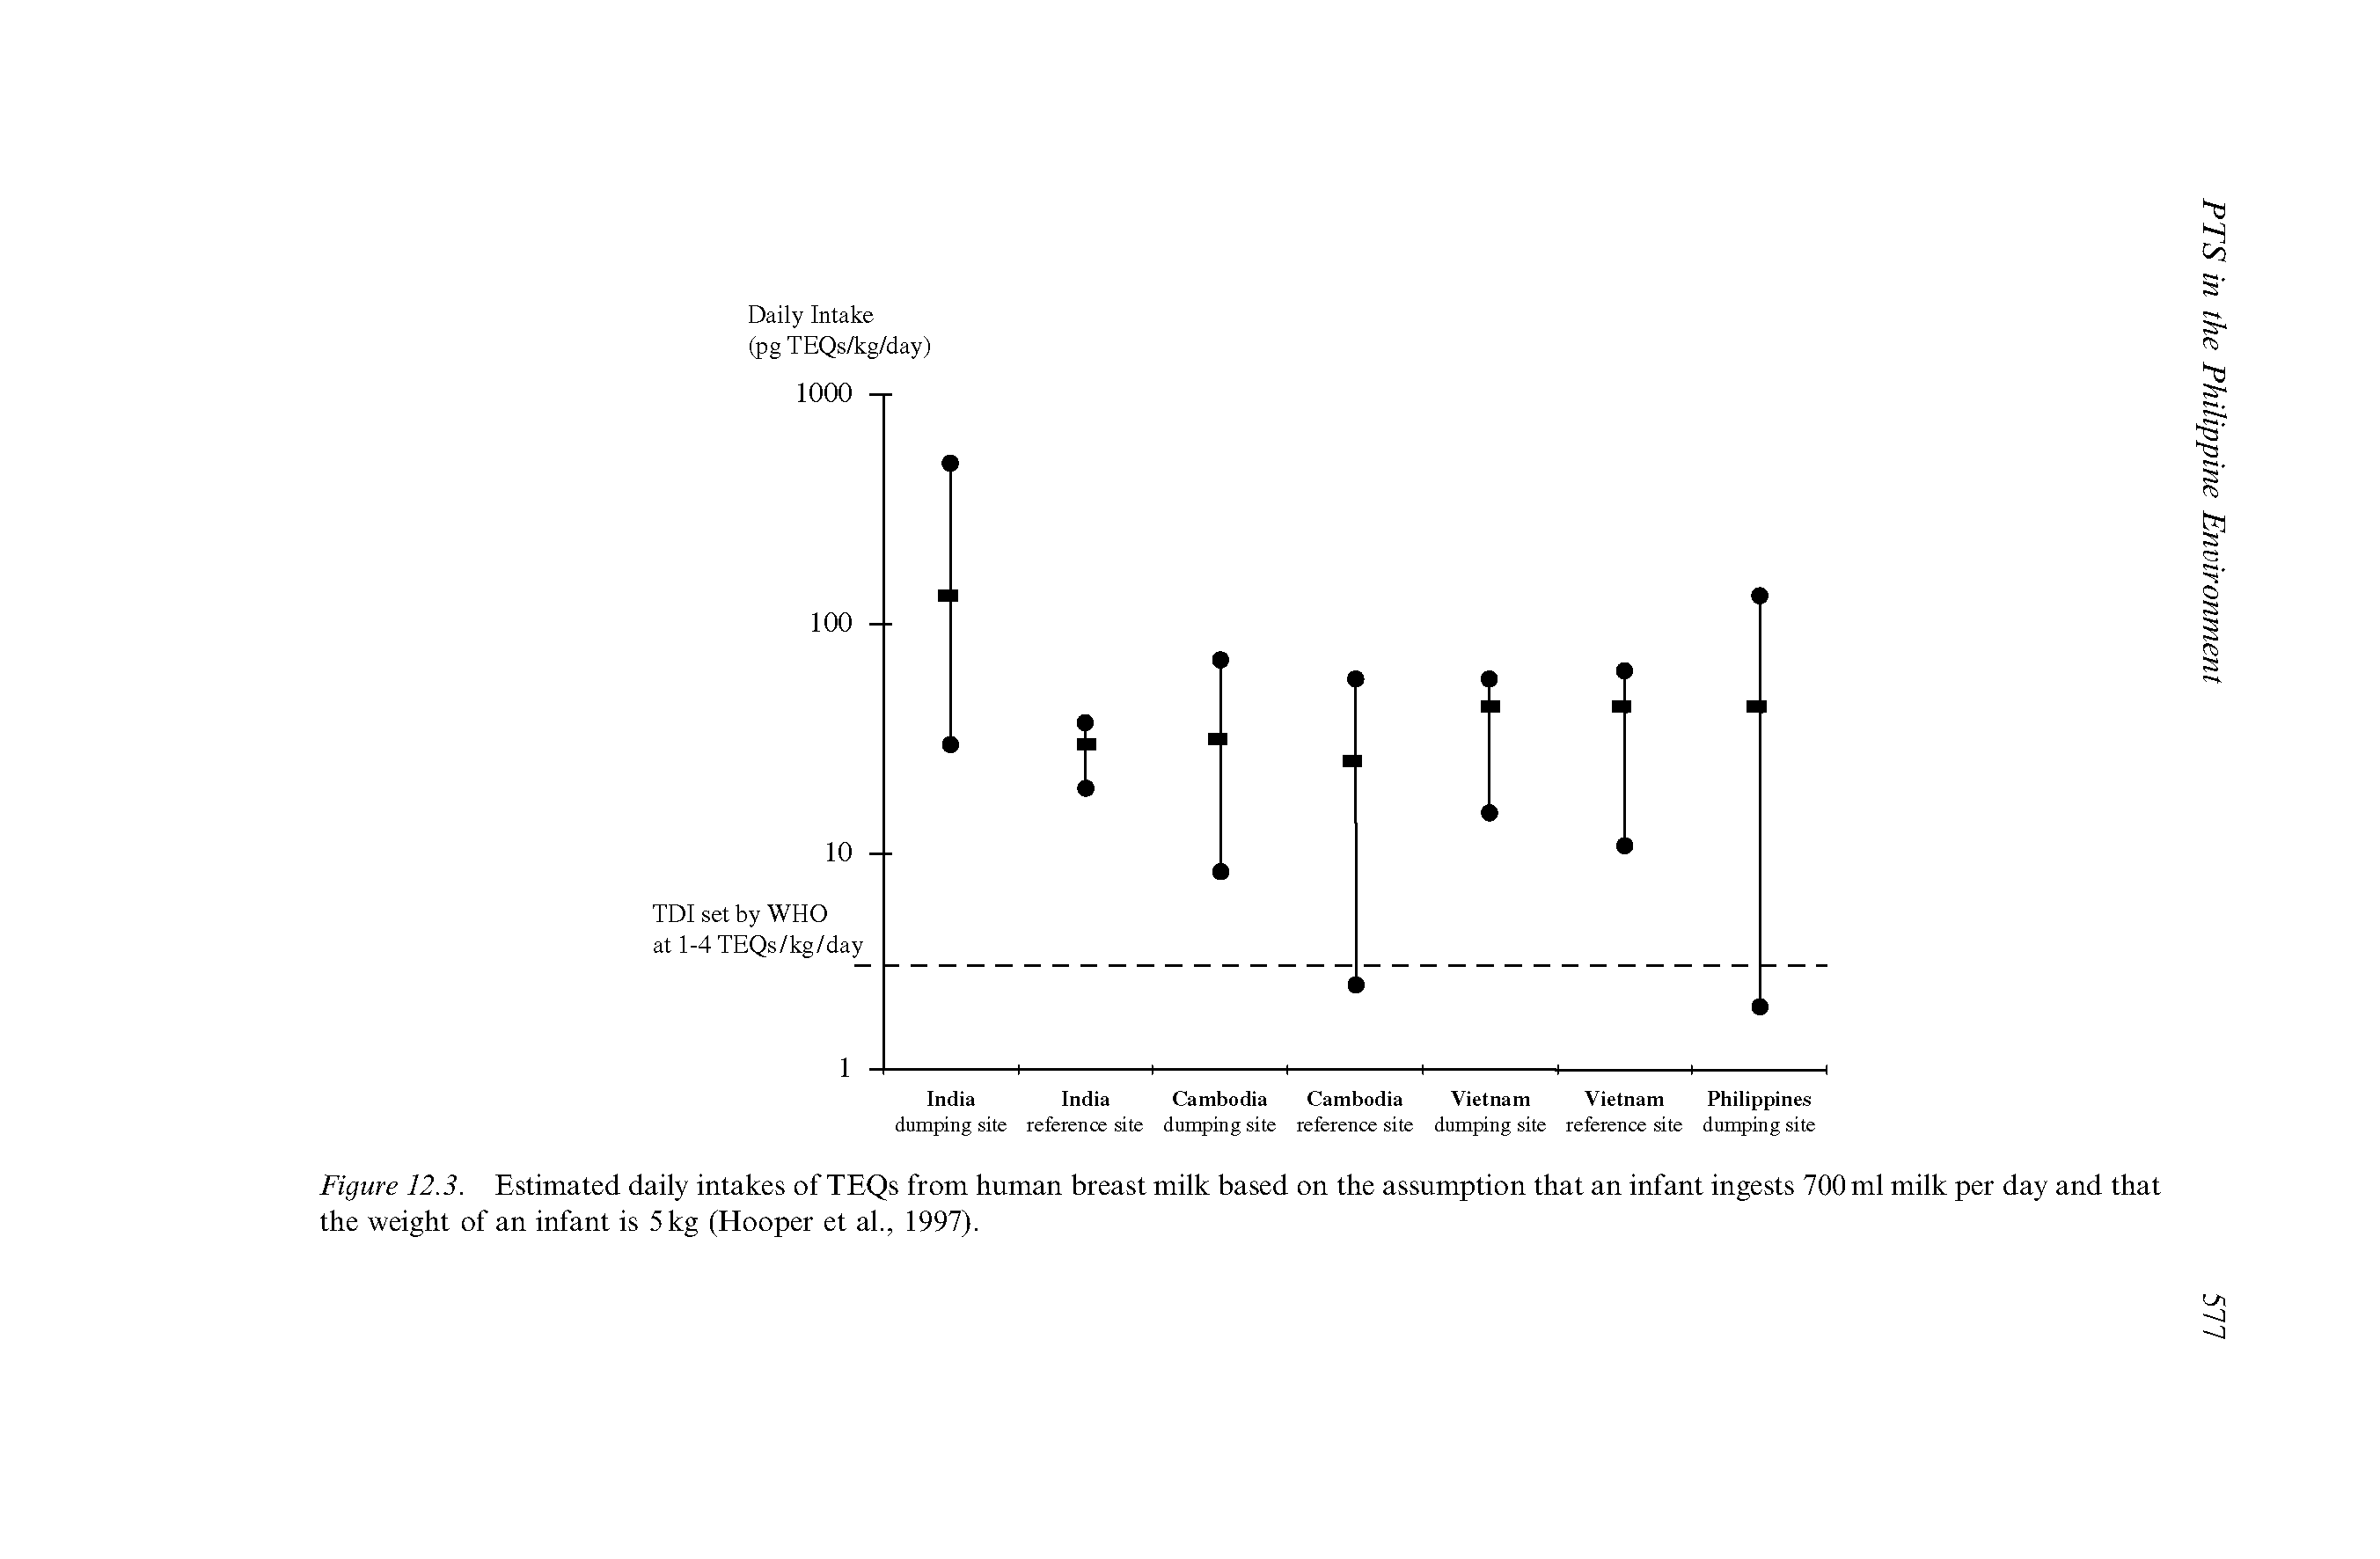 Figure 12.3. Estimated daily intakes of TEQs from human breast milk based on the assumption that an infant ingests 700 ml milk per day and that the weight of an infant is 5 kg (Hooper et al., 1997).